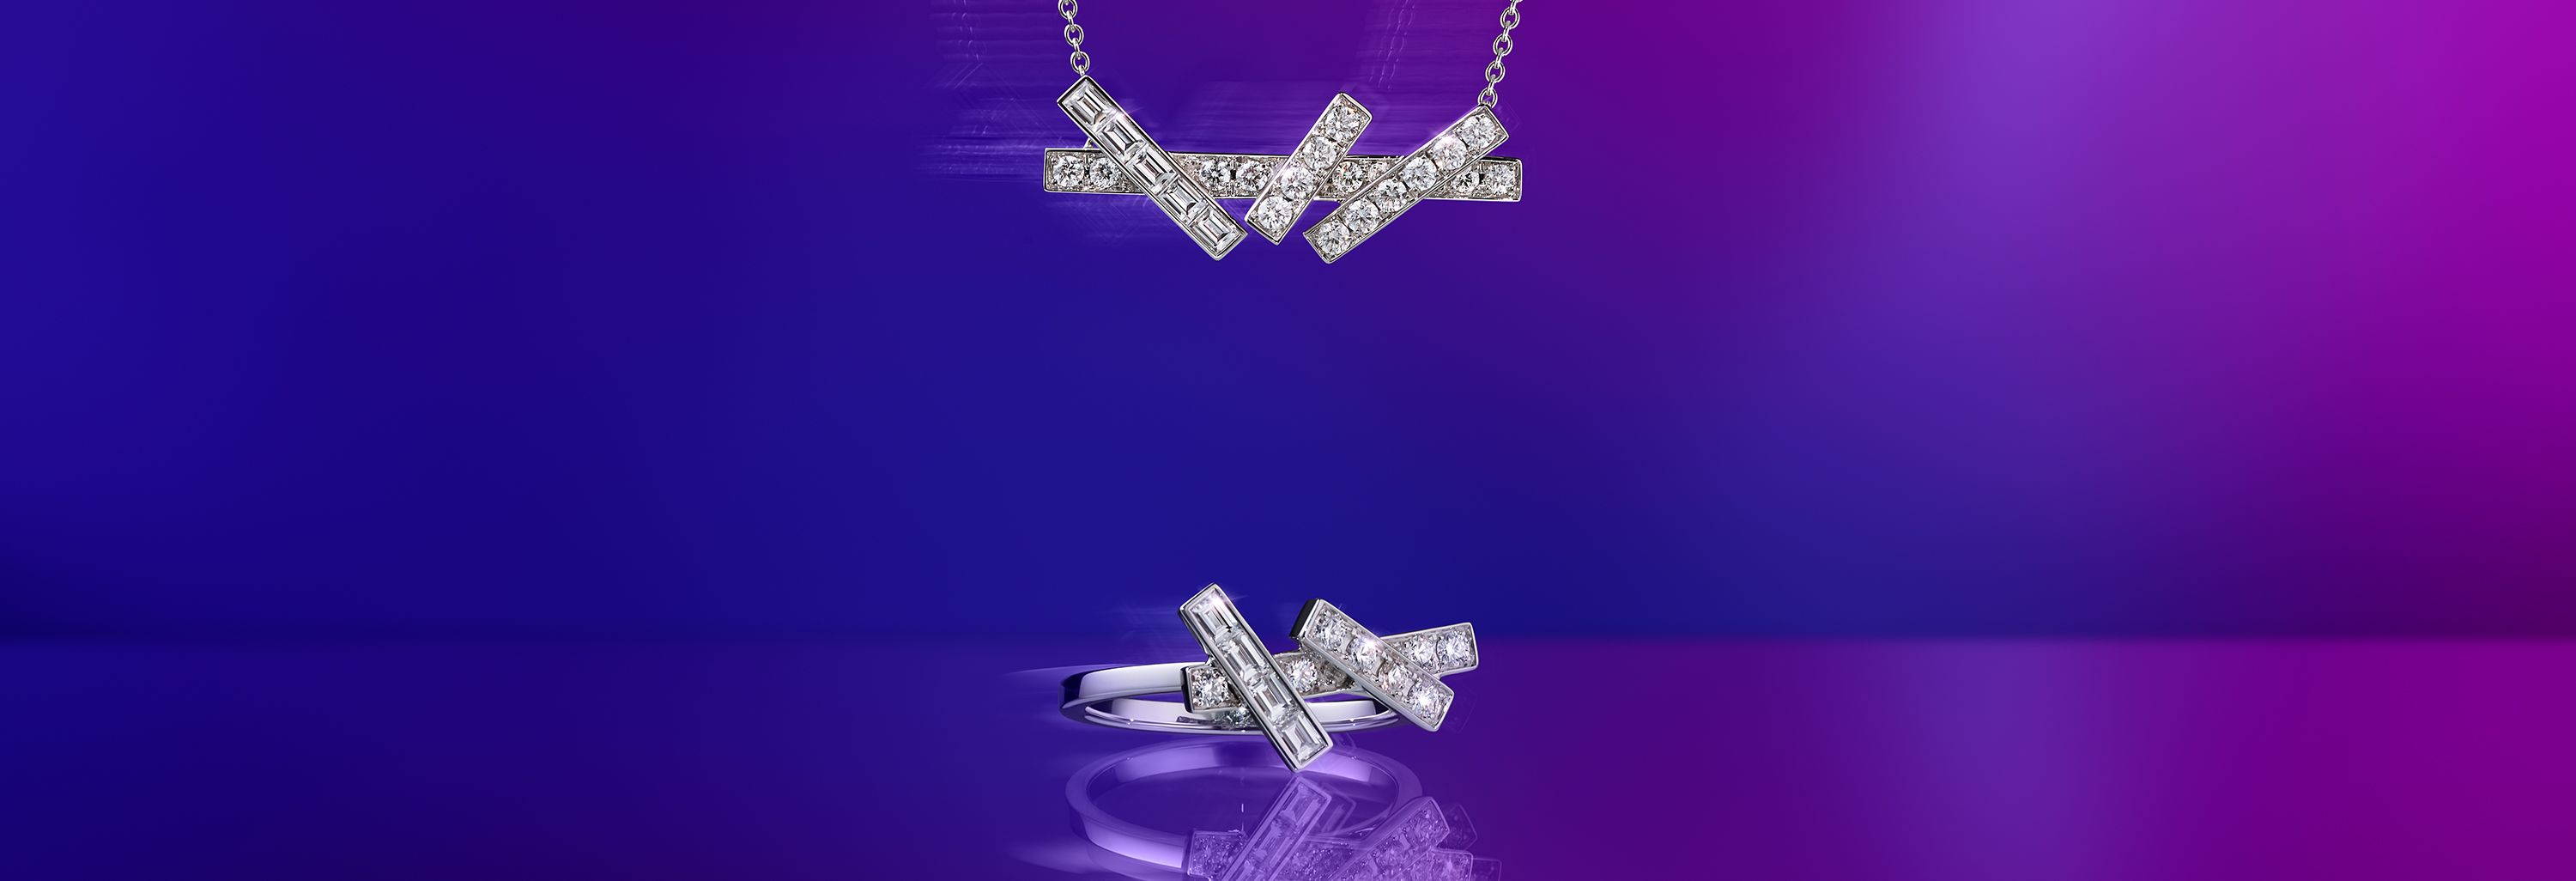 Graff Threads Diamond Pendant and Threads Diamond Stud Earrings from the Graff jewellery collection